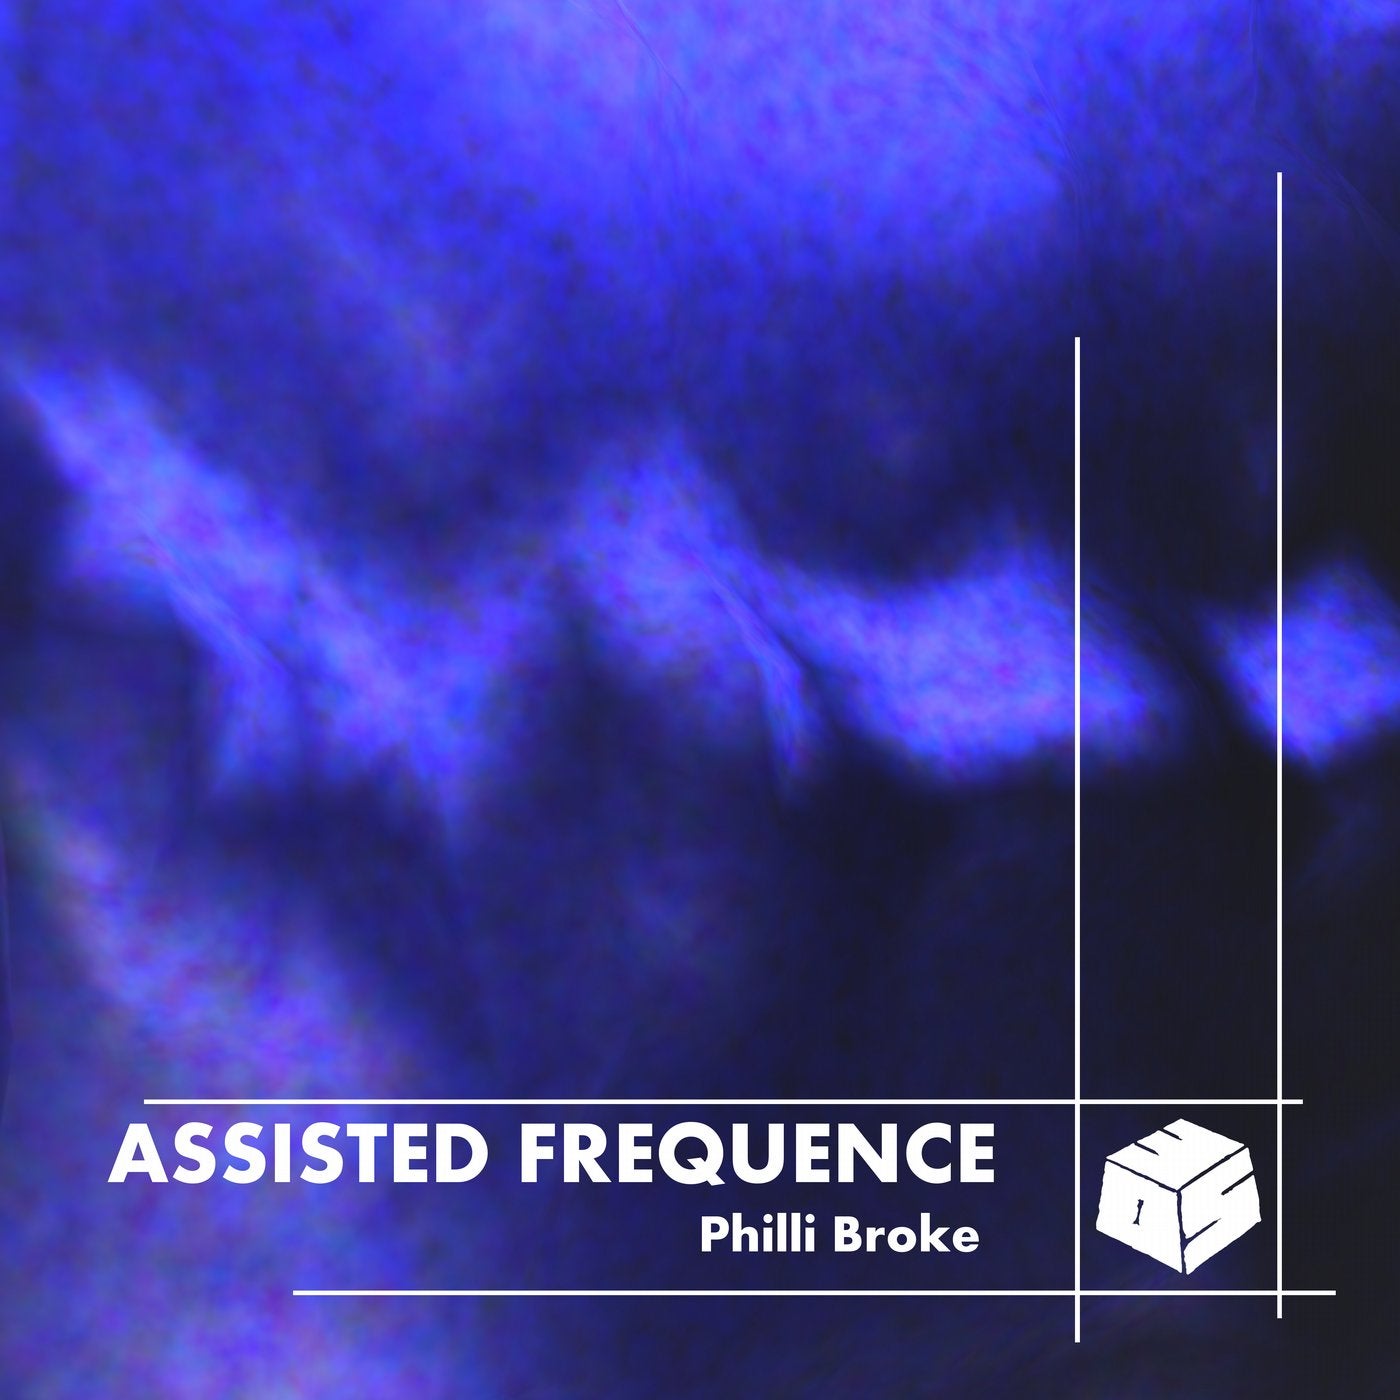 Assisted Frequence